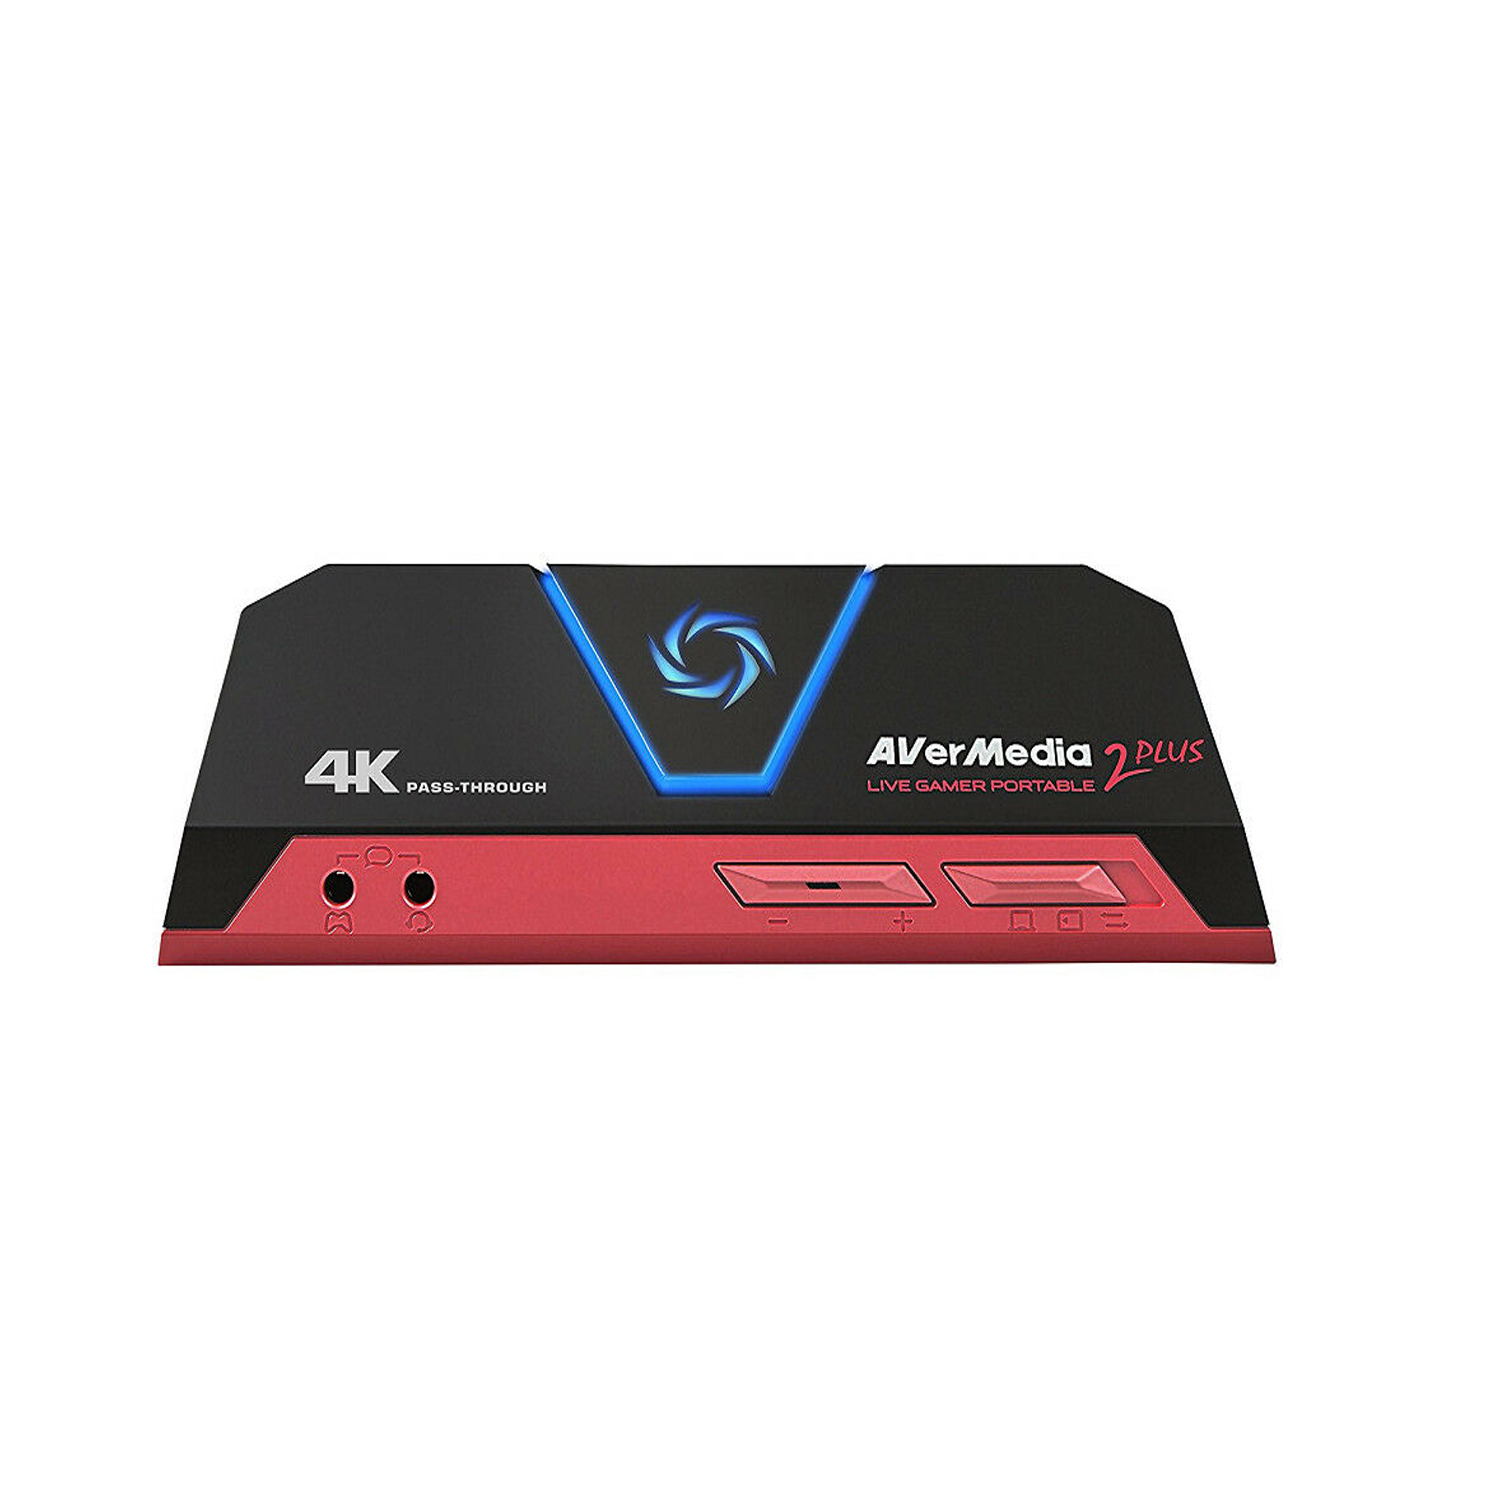 AVerMedia GC513 Live Gamer Portable 2 Plus, 4K Pass-Through, 4K Full HD 1080p60 USB Game Capture, Ultra Low Latency, Record, Stream, Plug & Play, Party Chat for XBOX, PlayStation, Nintendo Switch